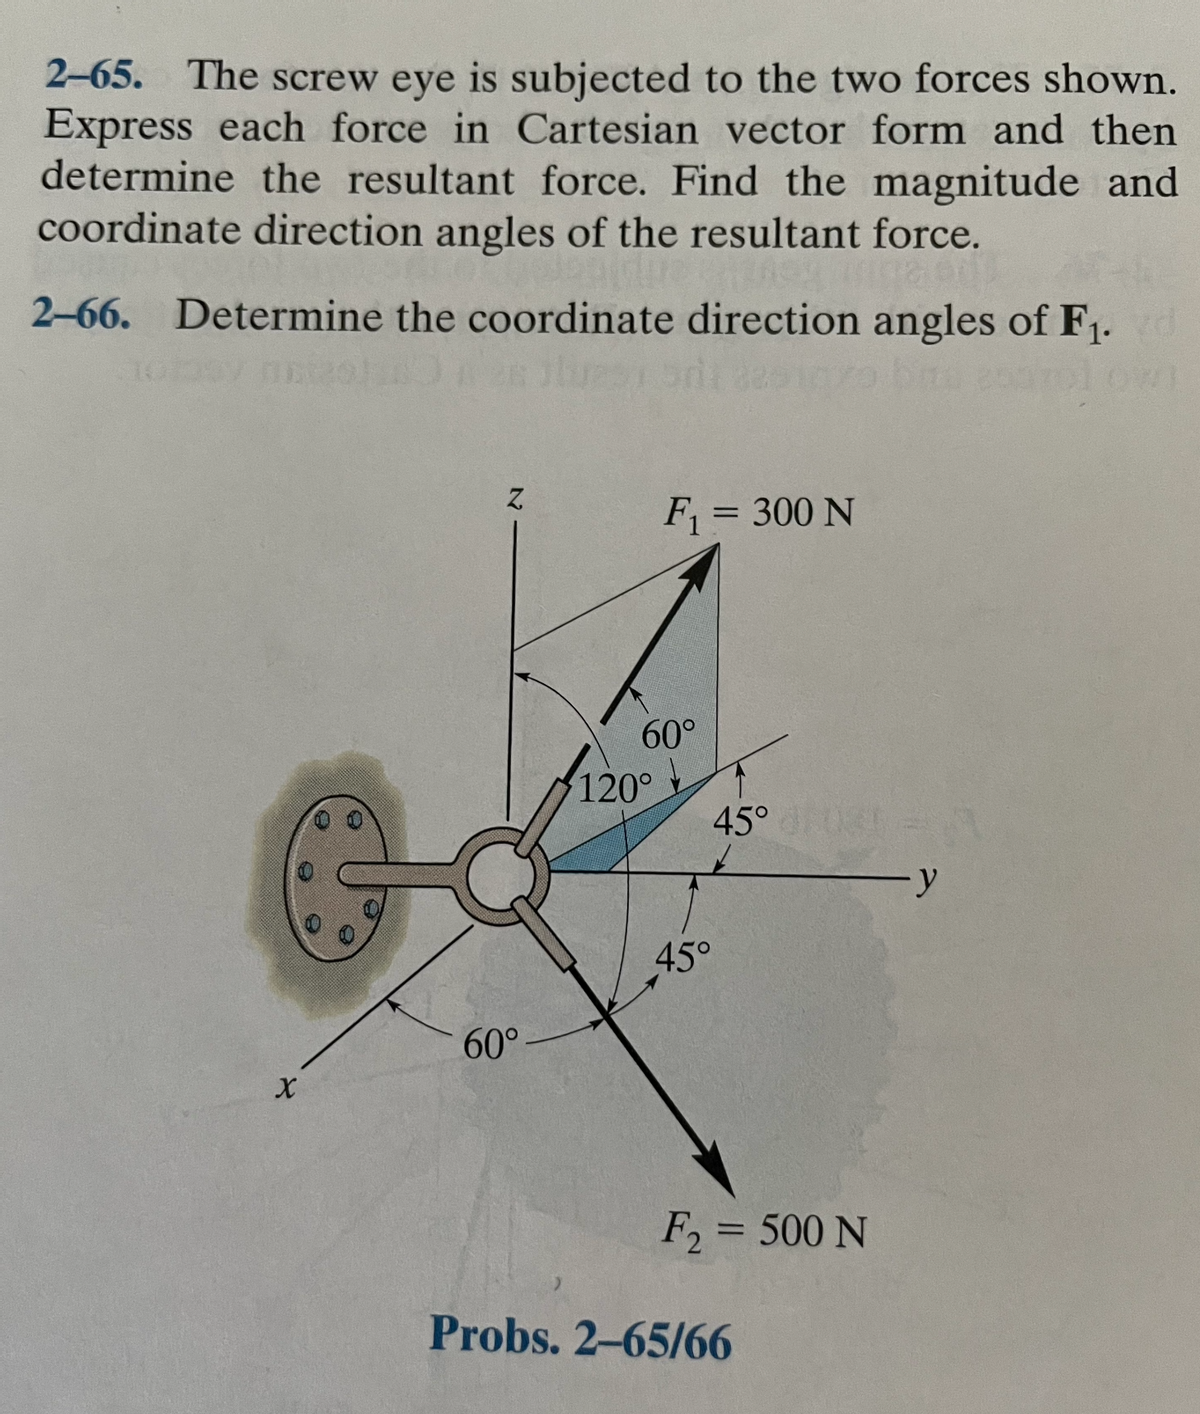 2-65. The screw eye is subjected to the two forces shown.
Express each force in Cartesian vector form and then
determine the resultant force. Find the magnitude and
coordinate direction angles of the resultant force.
2-66. Determine the coordinate direction angles of F1.
F1 = 300 N
60°
120°
45°
45°
60°
F, = 500 N
Probs. 2-65/66
